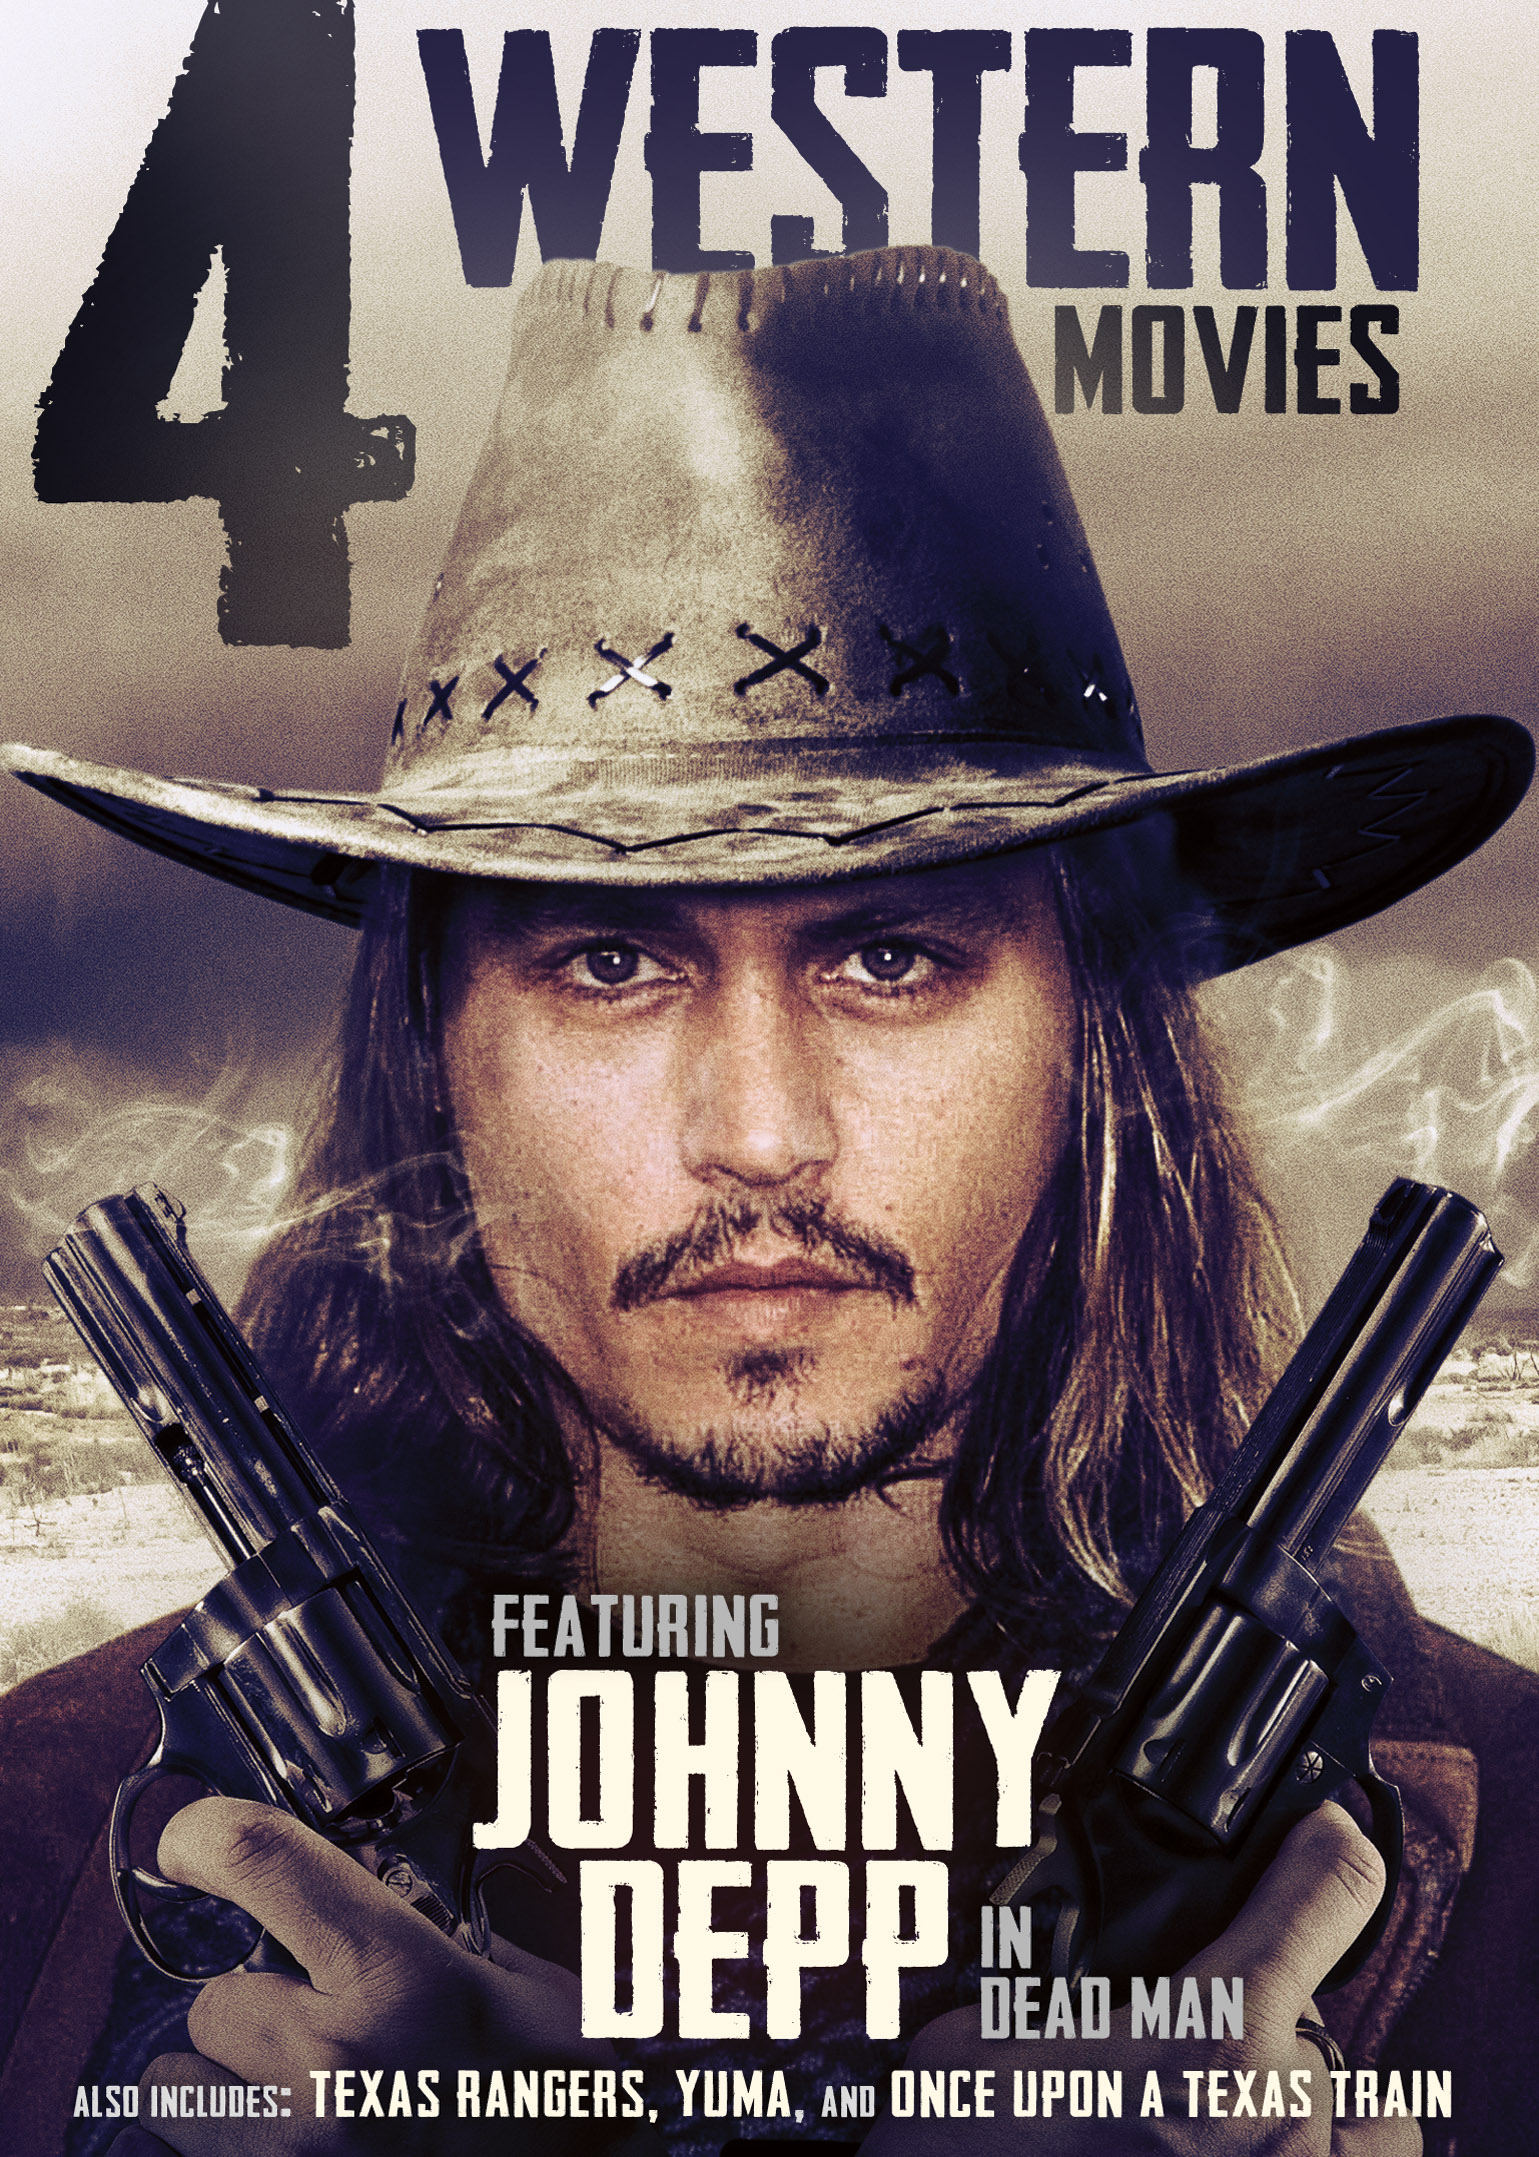 4-MOVIES WESTERN: FEATURING JOHNNY DEPP IN DEAD